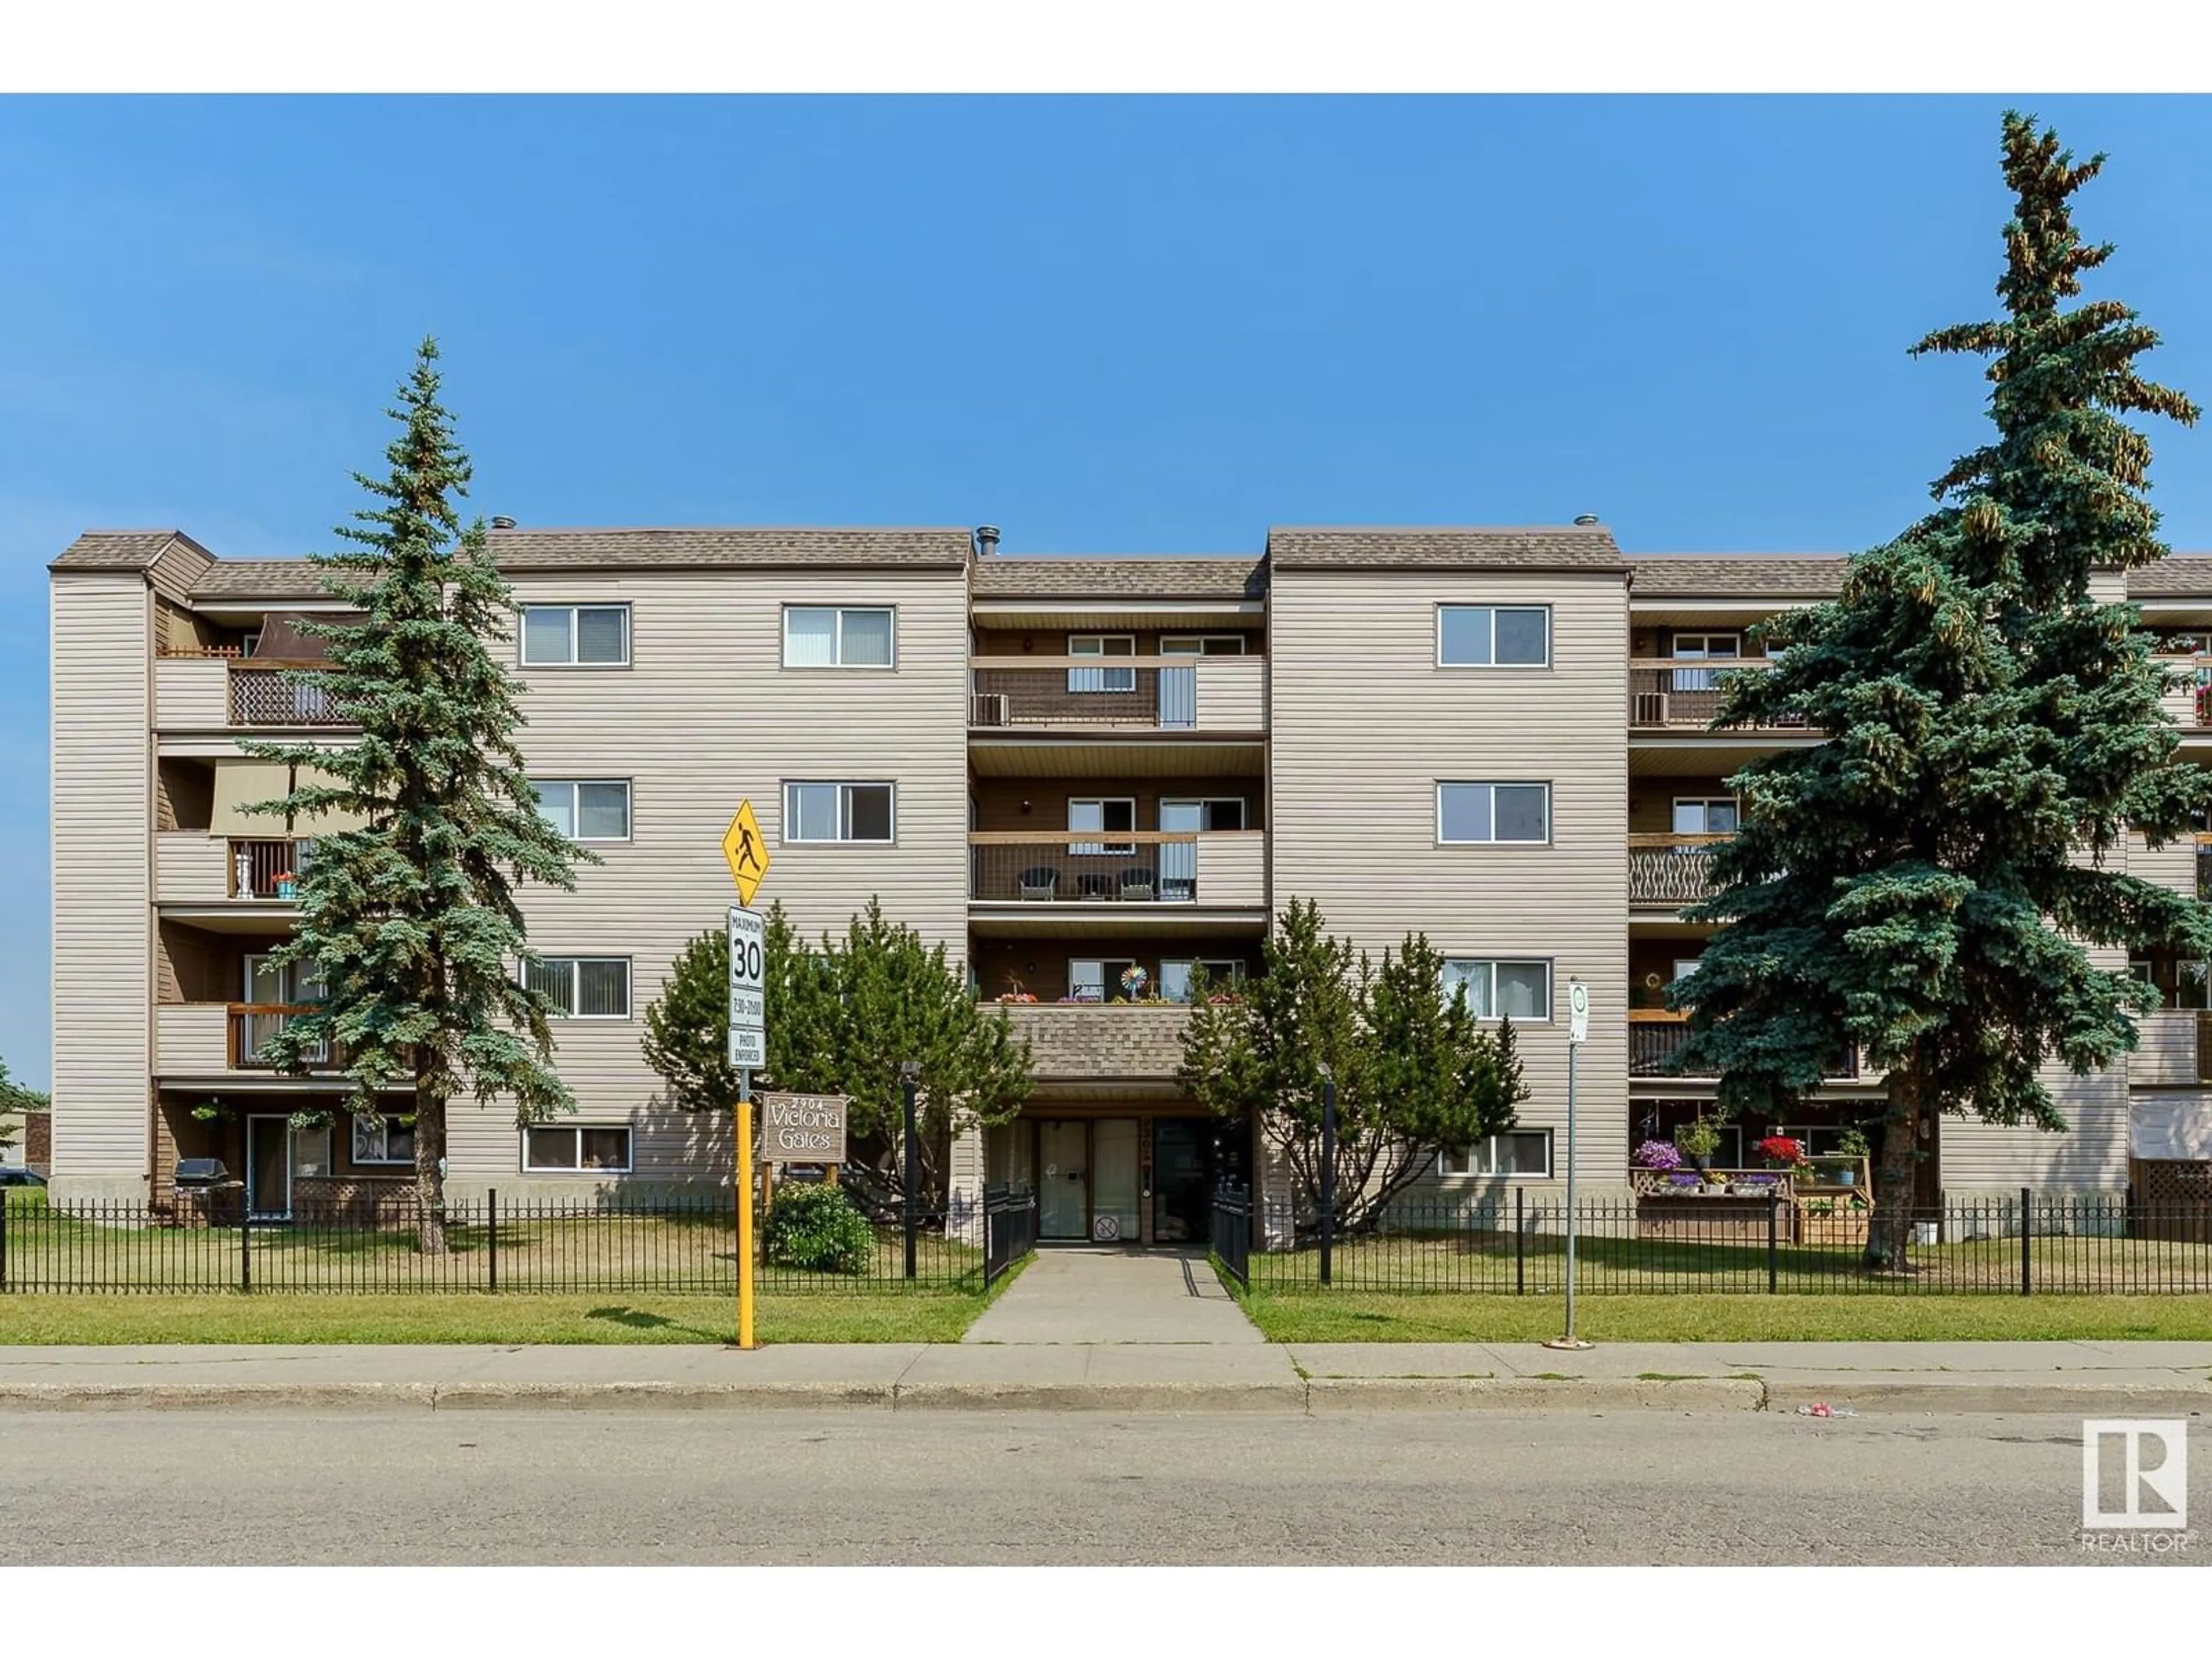 A pic from exterior of the house or condo for #315 2904 139 AV NW, Edmonton Alberta T5Y1P7